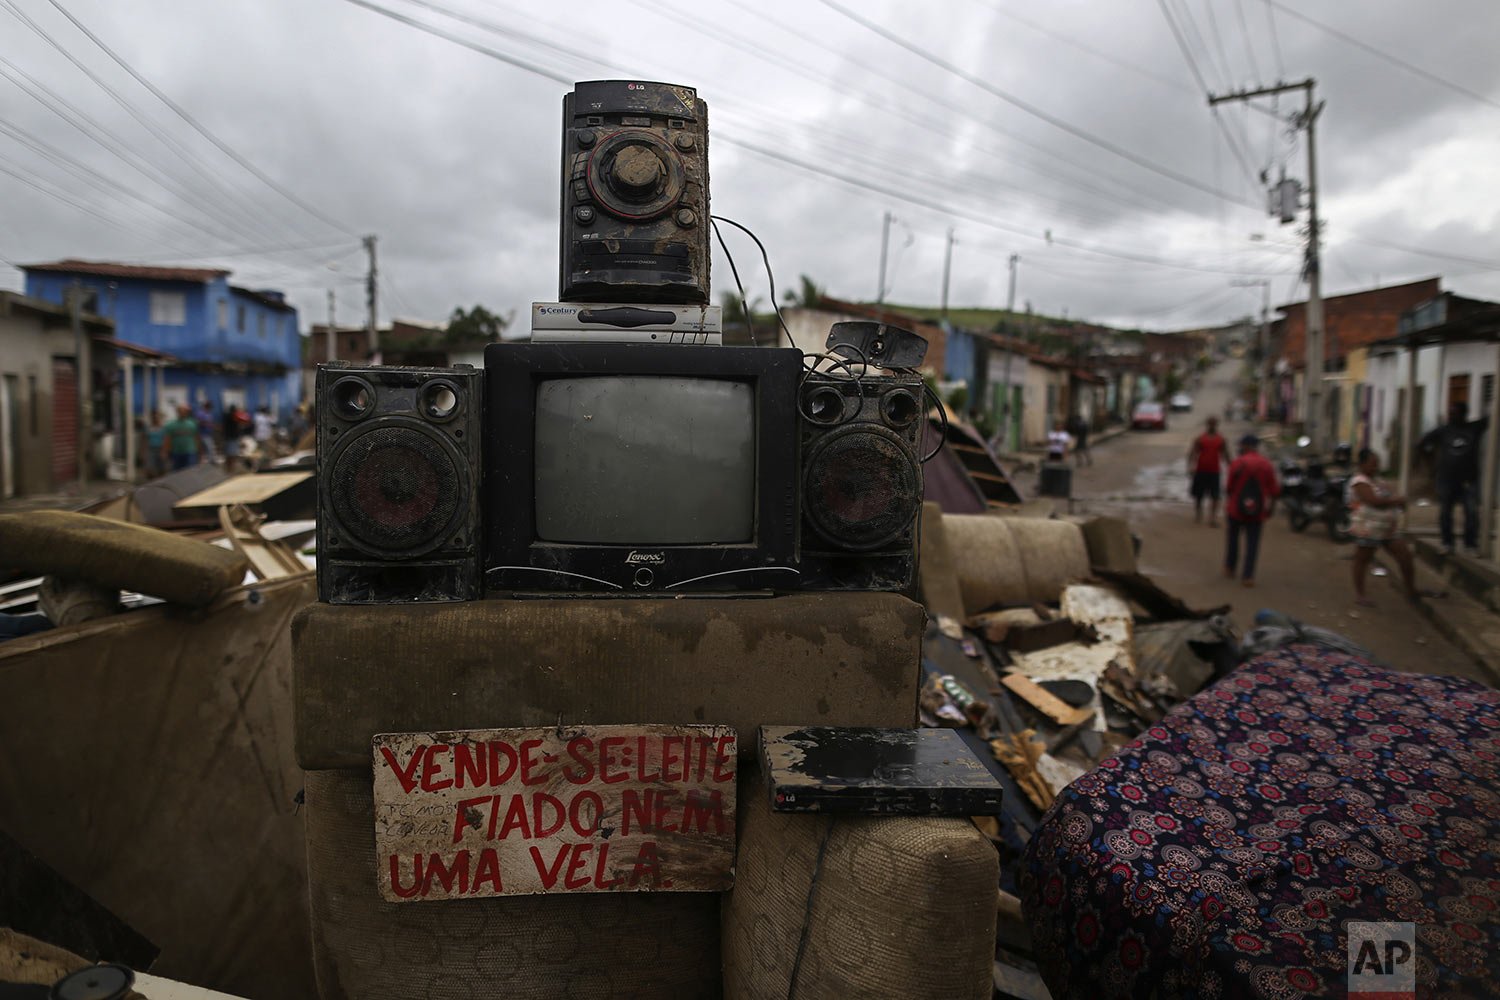  Furniture destroyed by flooding is piled in a street, including an old for sale sign, in Itapetinga, Bahia state, Brazil, Dec. 28, 2021. Two dams broke in northeastern Brazil, threatening worse flooding in a rain-drenched region that has already see